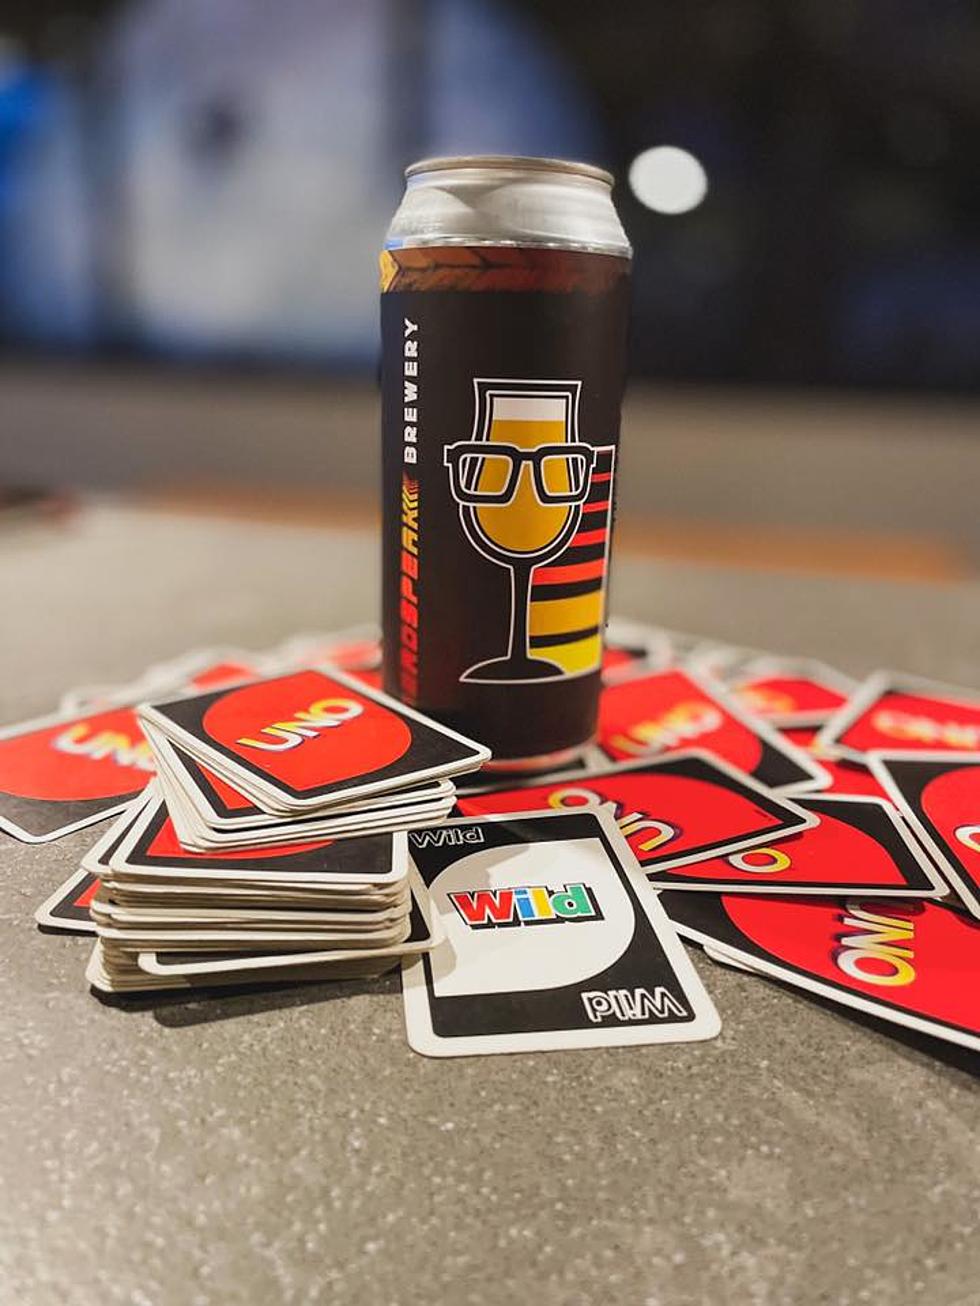 Keep Your Texas Hold ’em…Give Me a Good UNO Tournament Any Day!